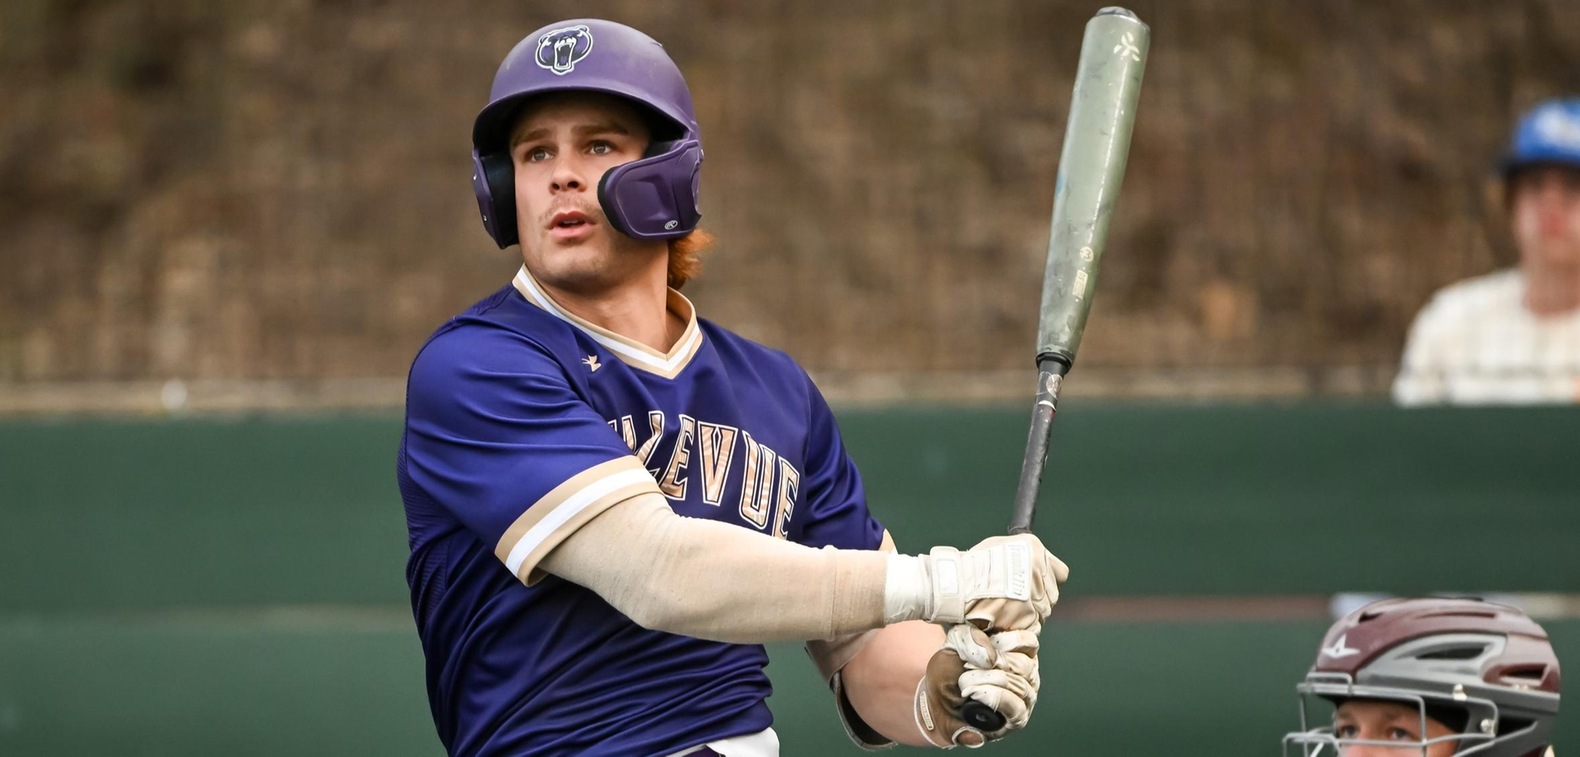 Alec Ackerman went 2-for-5 with two home runs and six RBIs to pace the BU offense.